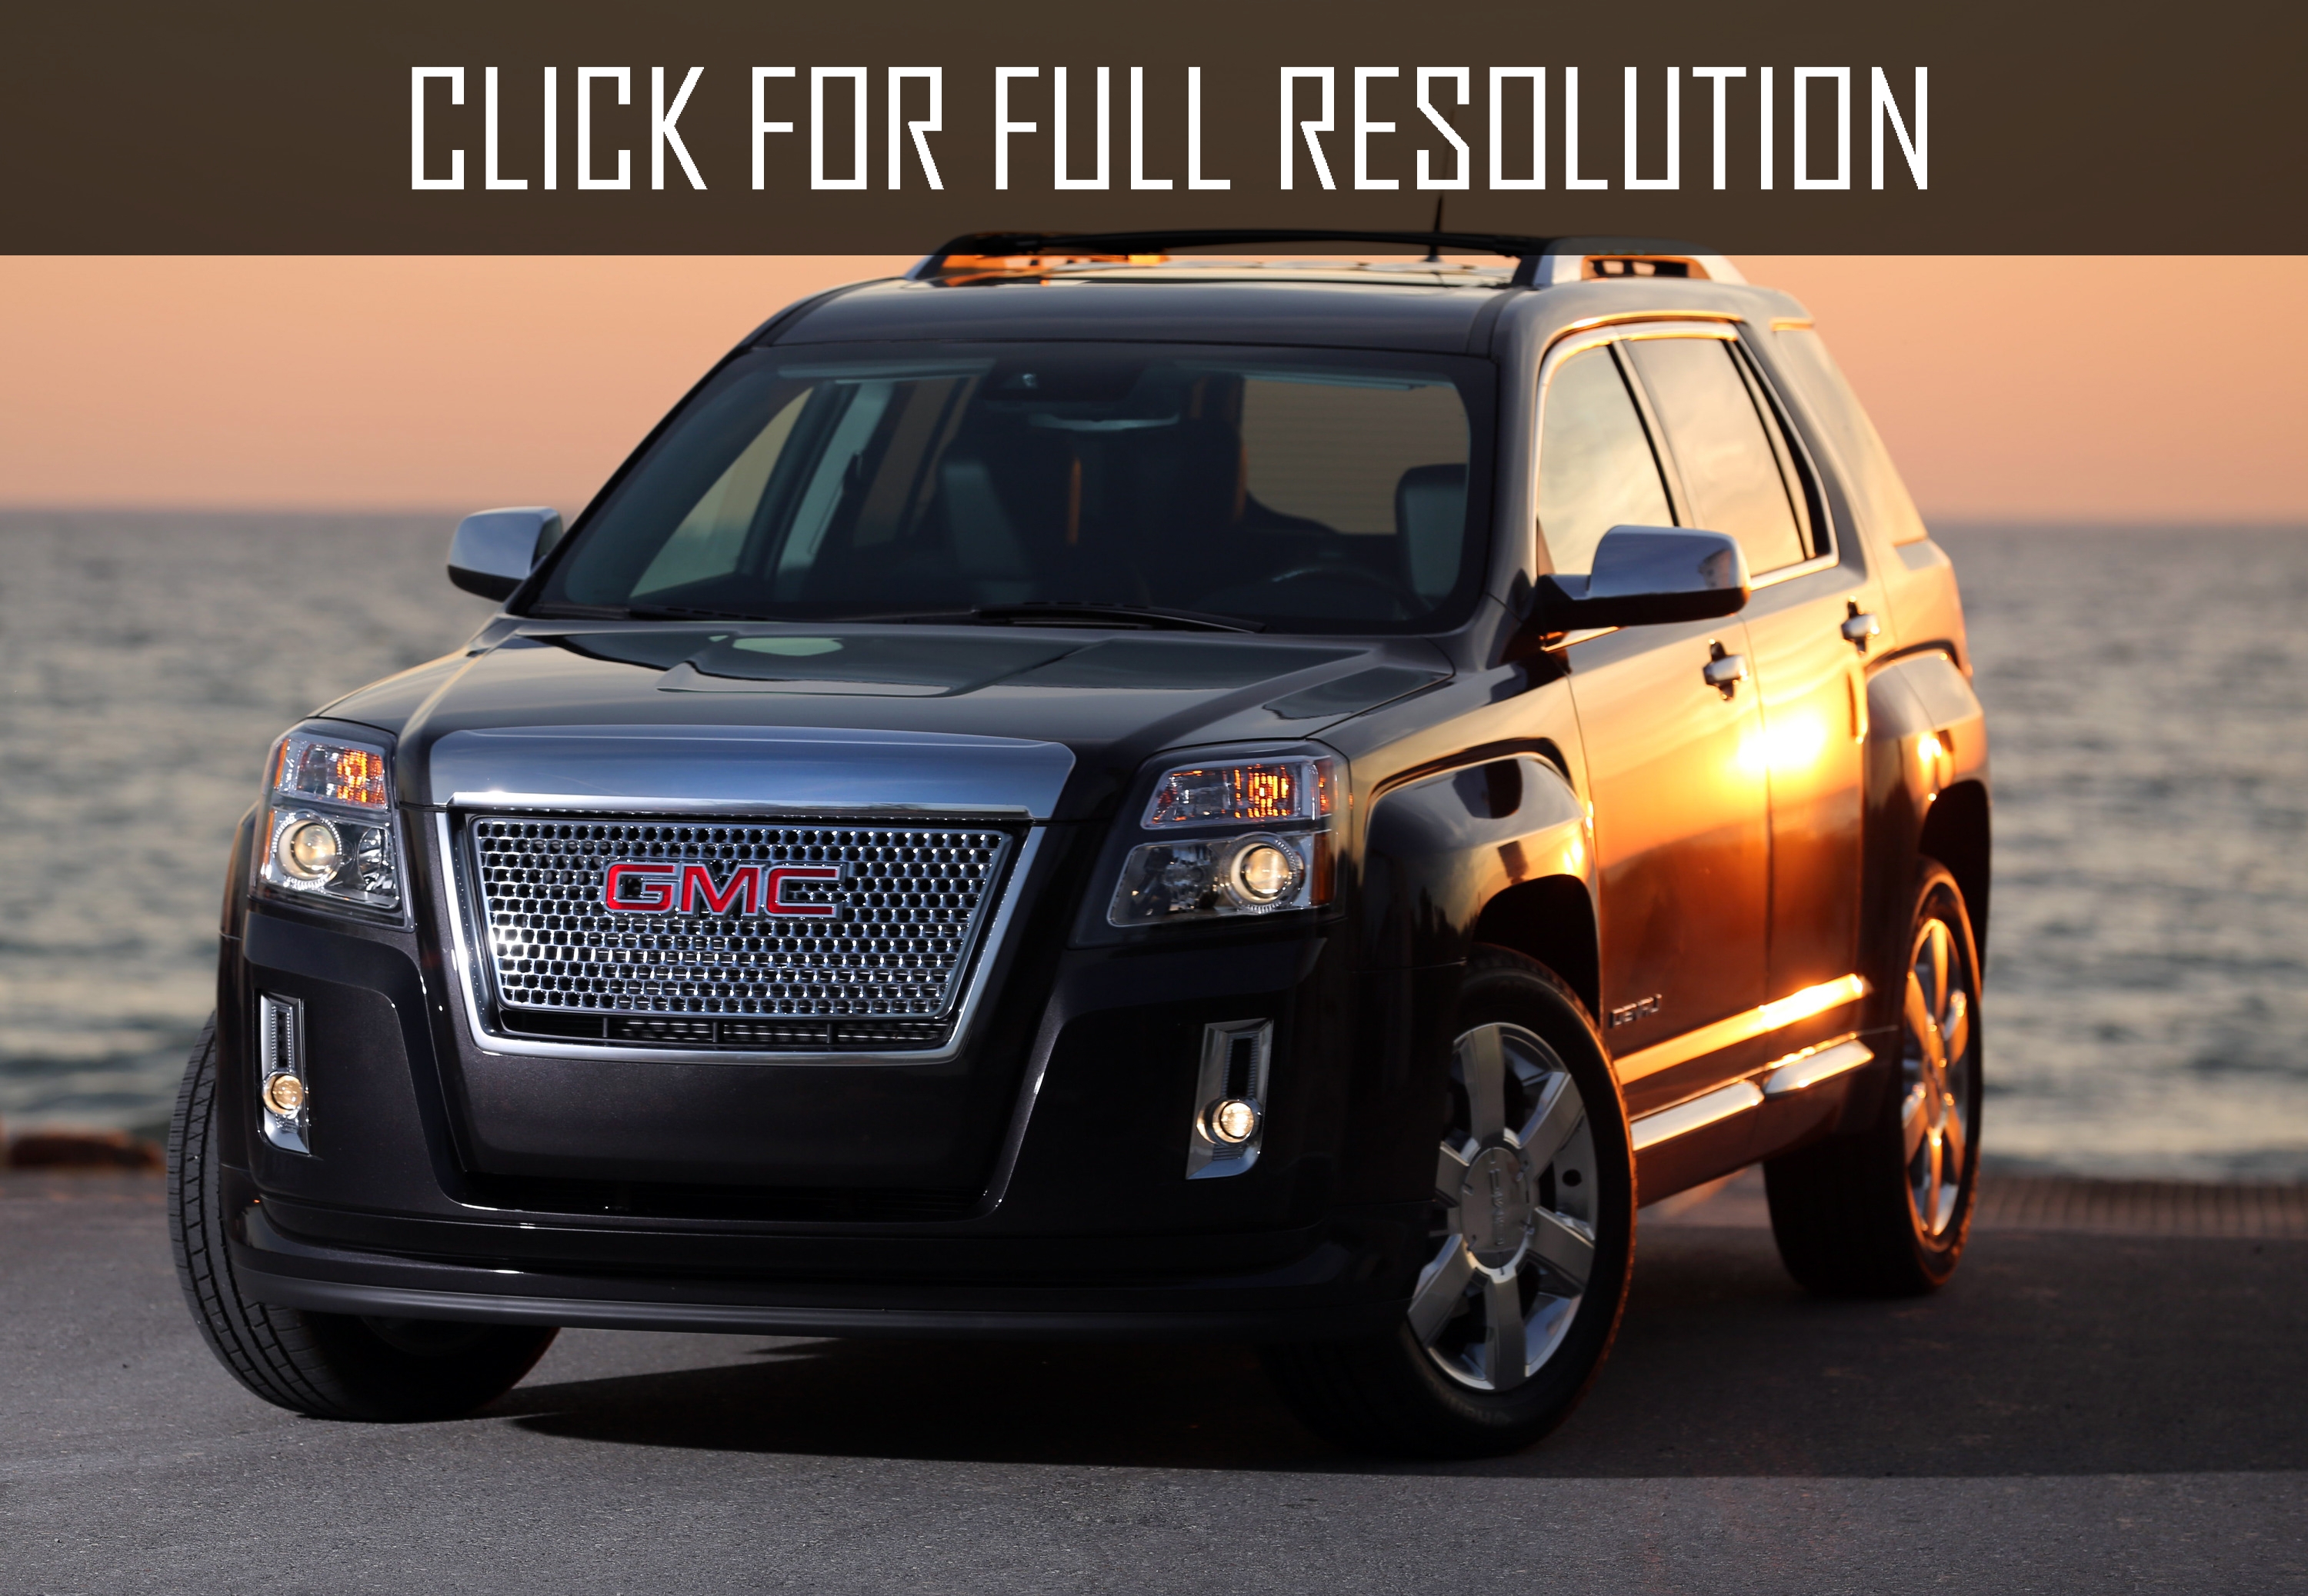 2014 Gmc Terrain Denali news, reviews, msrp, ratings with amazing images